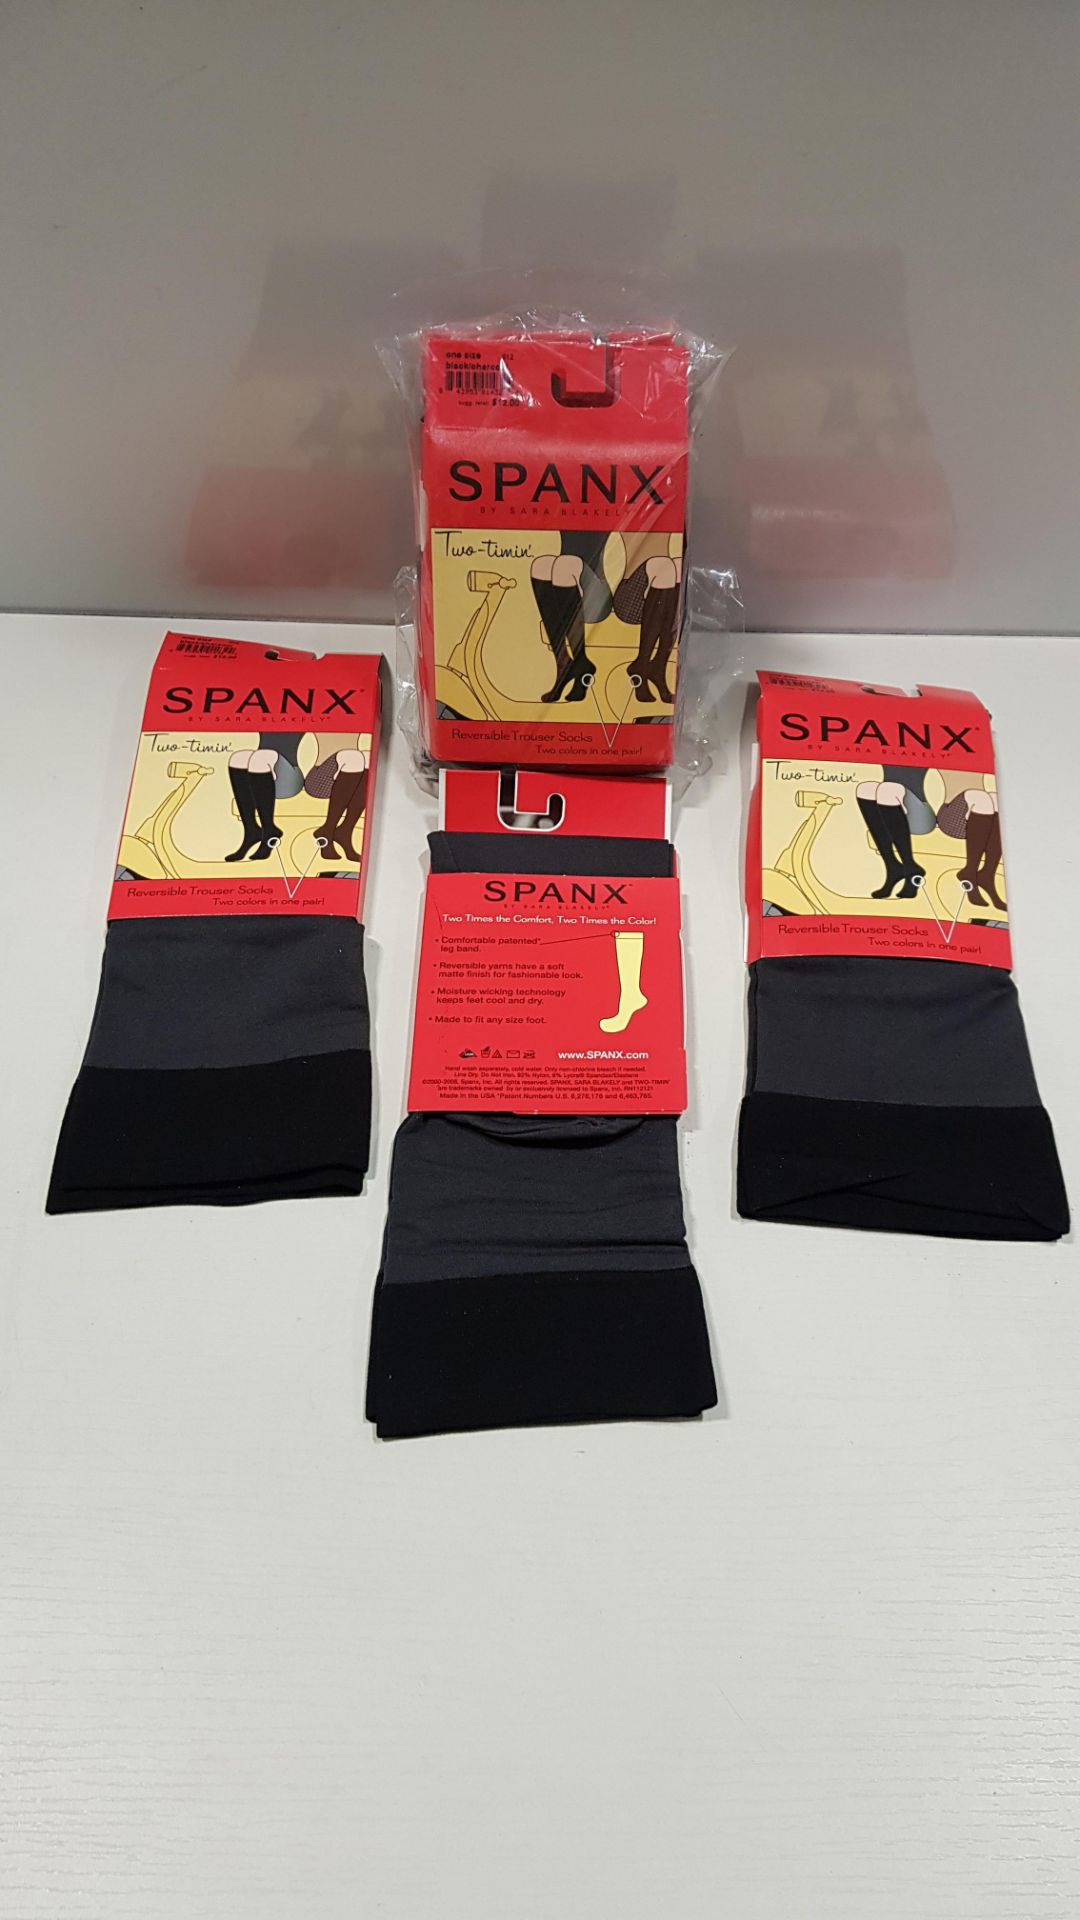 120 X BRAND NEW SPANX REVERSIBLE TROUSER SOCKS 2 COLOURS IN 1 PAIR RRP $12.00 (TOTAL RRP $1440.00)